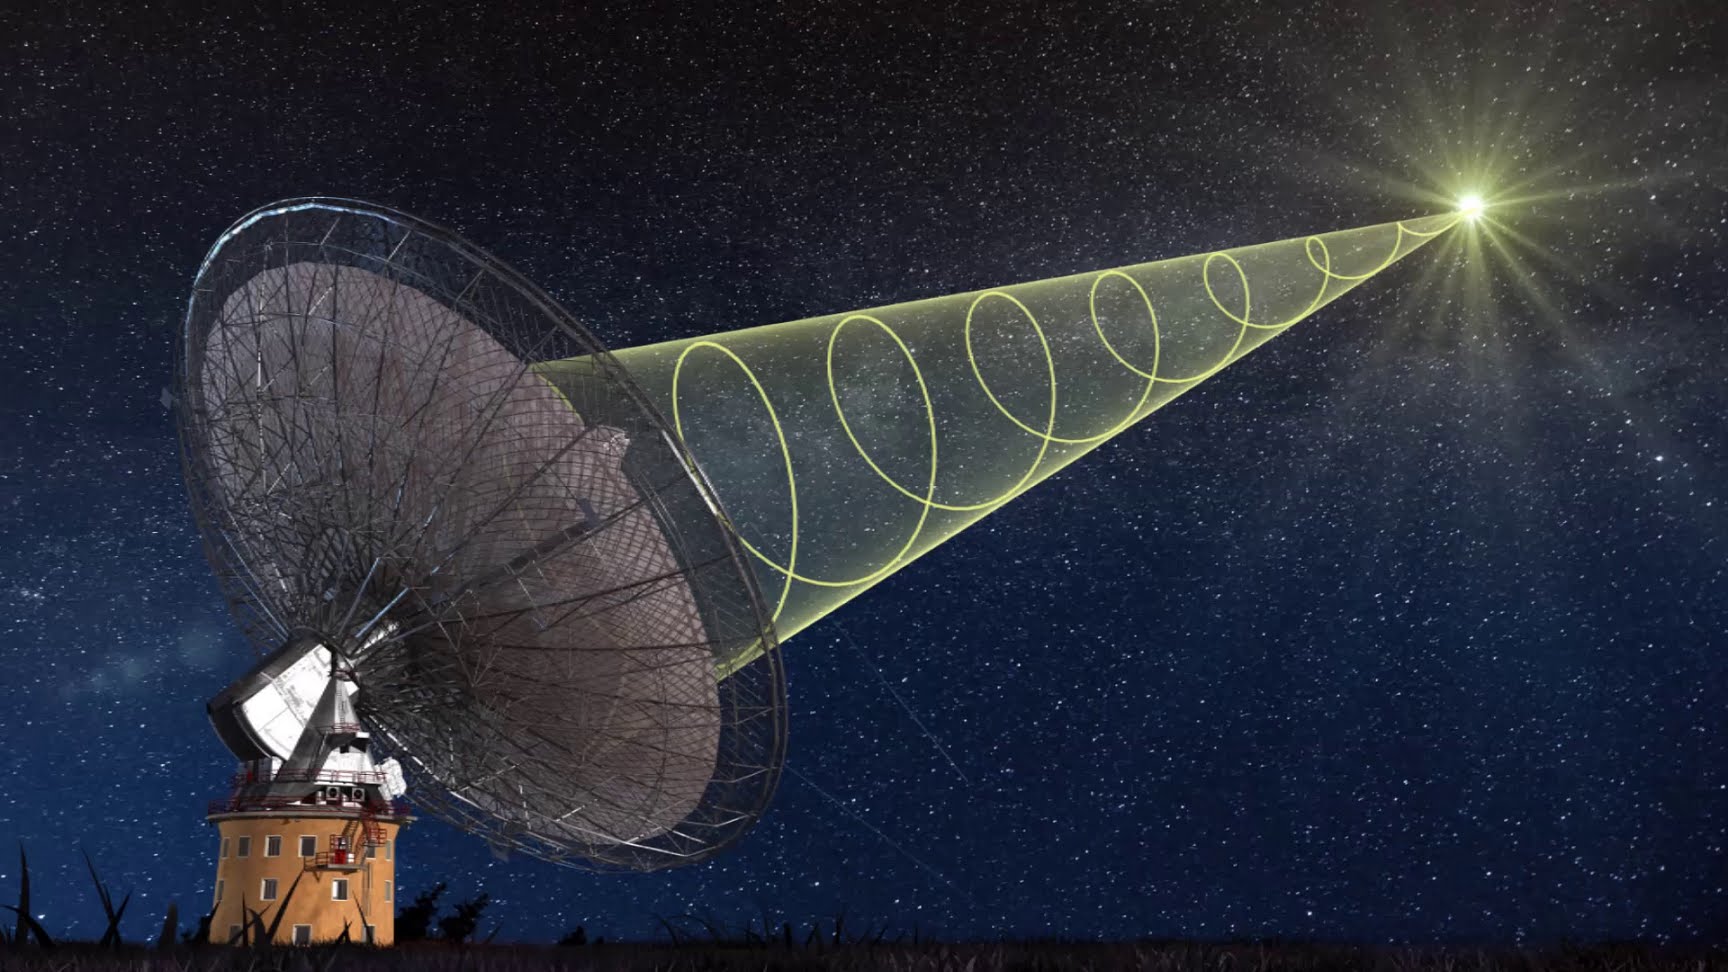 mysterious space signal, mysterious fast radio burst, repeating fast radio burstspace signal from magnetized neutron star, mysterious origin of fast radio bursts discovered